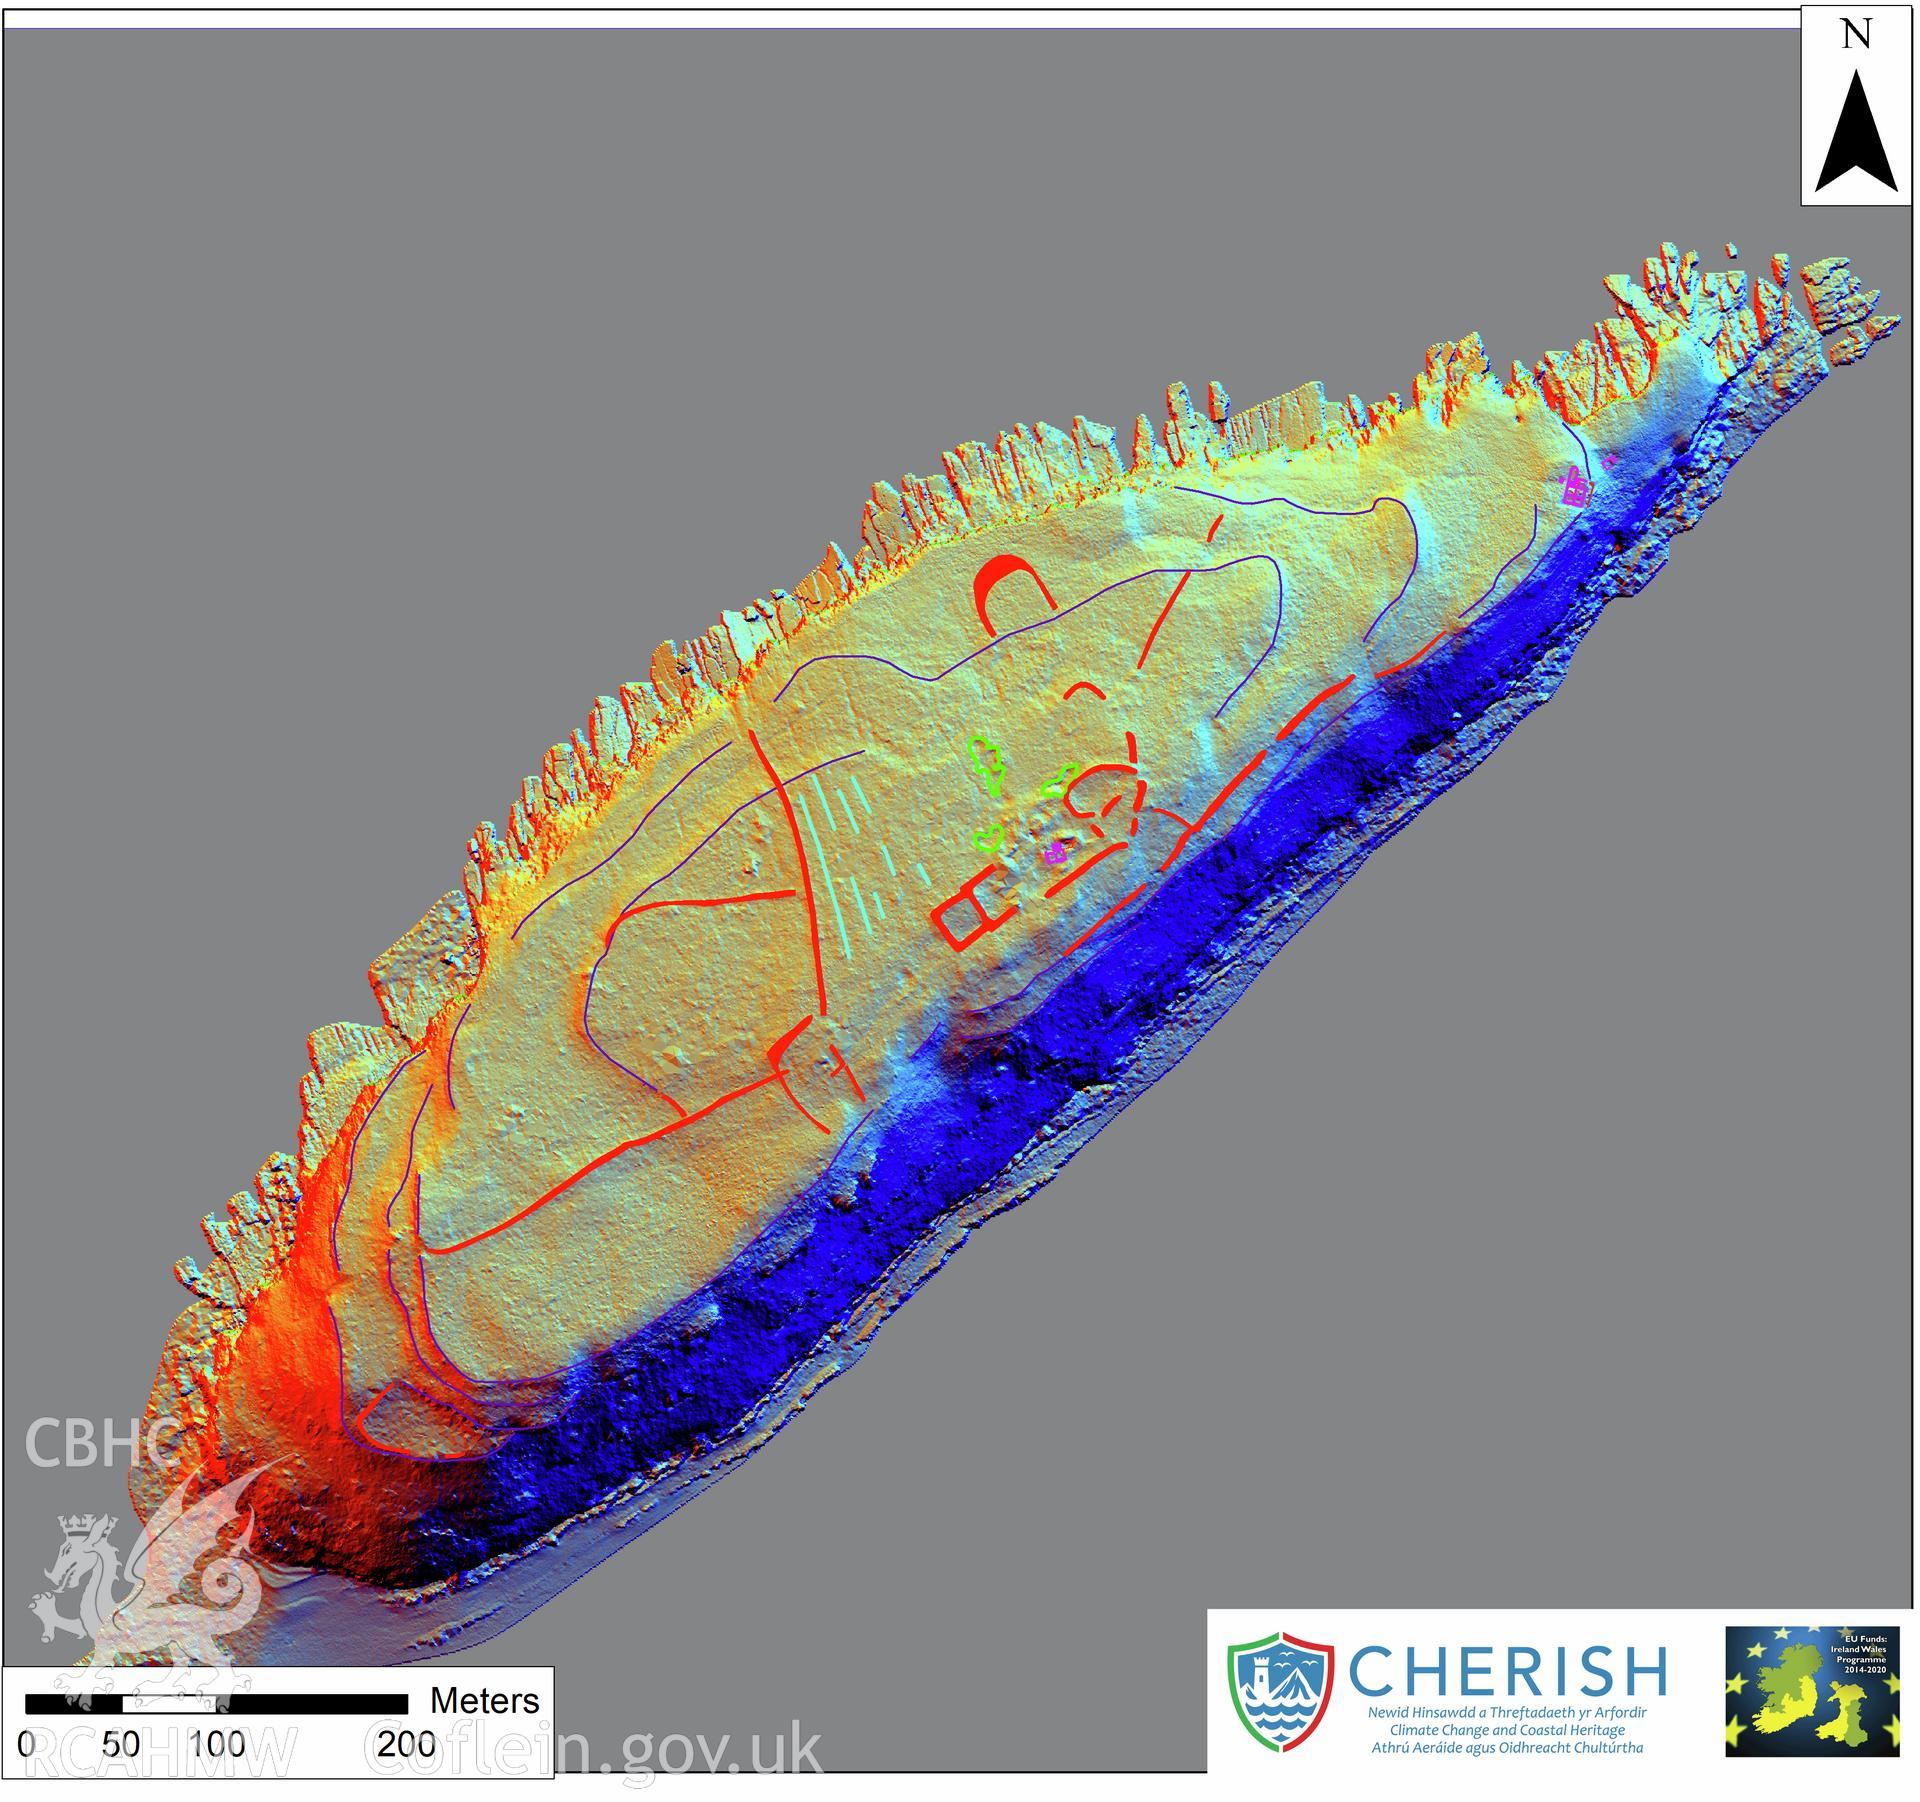 Ynys Seiriol (Puffin Island). Archaeological mapping over airborne laser scanning (LiDAR) commissioned by the CHERISH Project 2017-2021, flown by Bluesky International LTD at low tide on 24th February 2017. Digital Terrain Model (DTM) showing whole of the island with multi hill shading and aerial